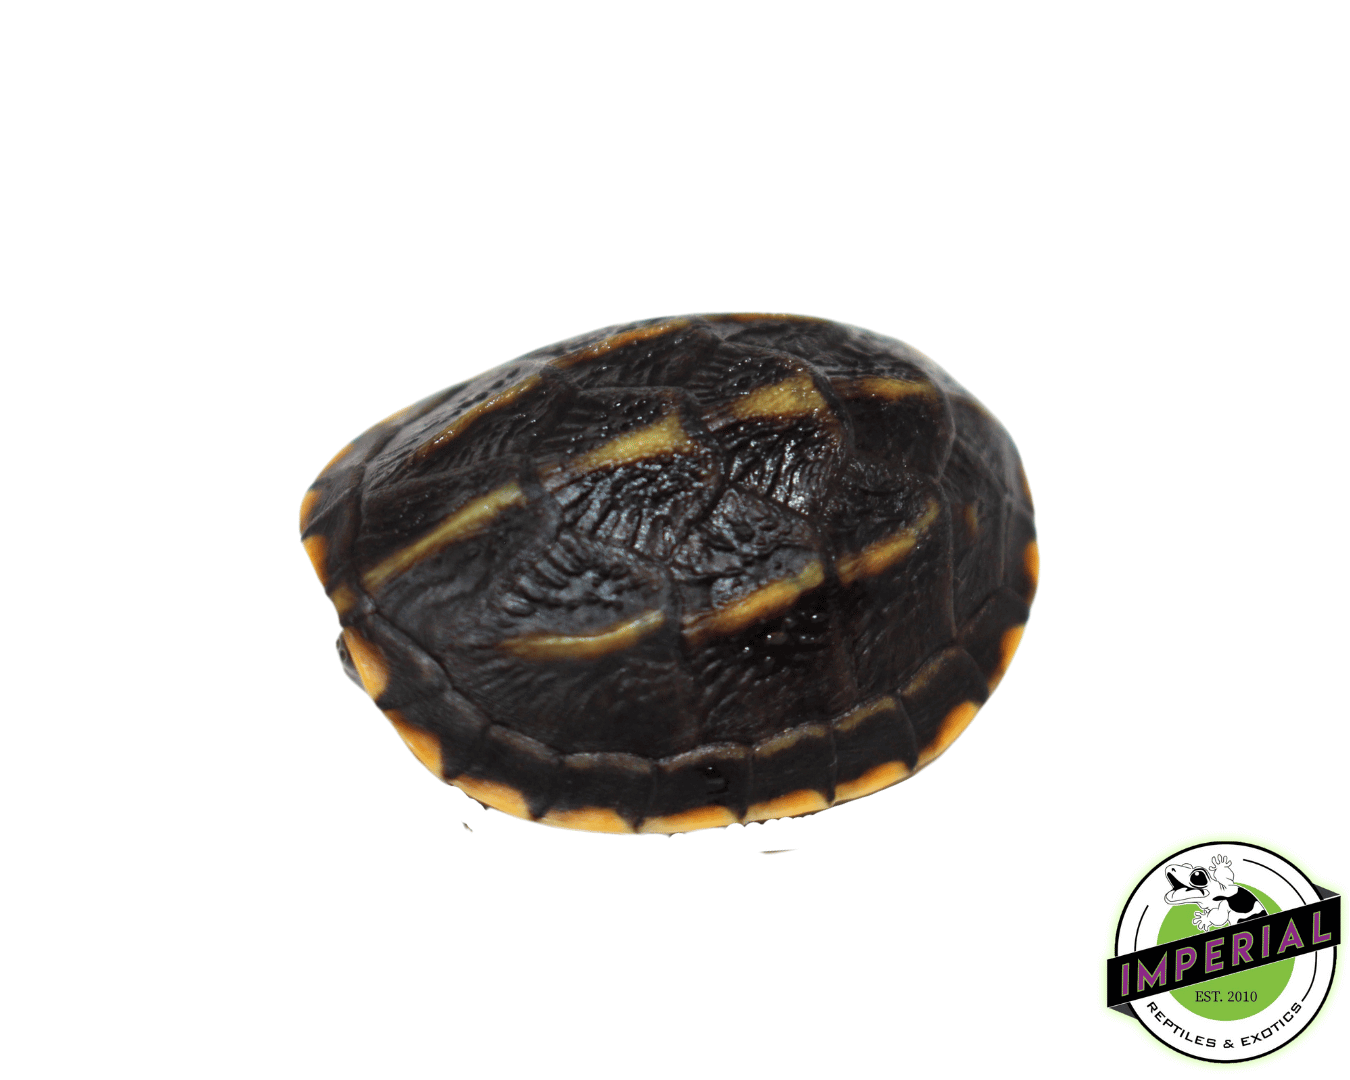 striped mud turtle for sale, buy reptiles online